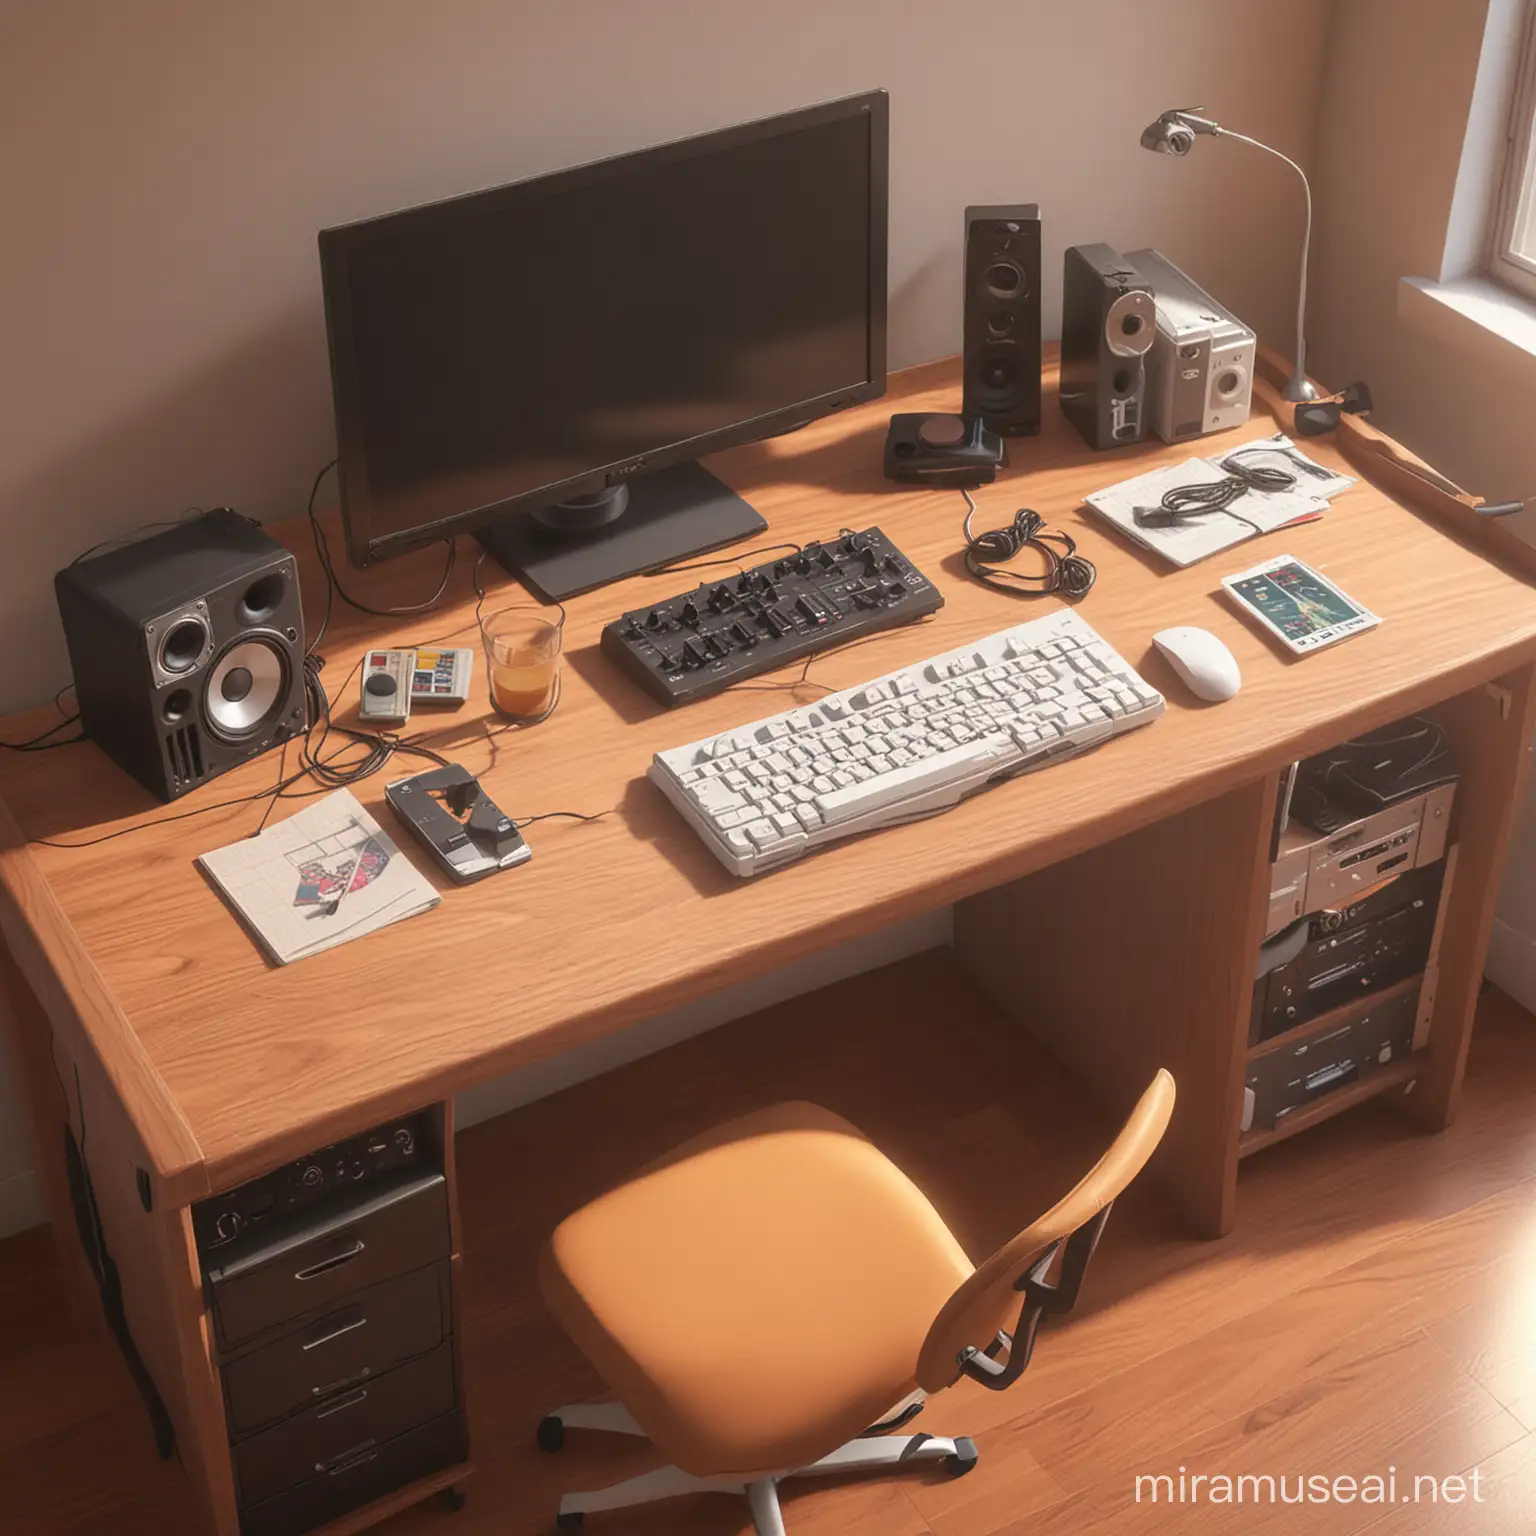 anime style, lofi style, picture of a desk with music equipment, straight perspective, forward perspective